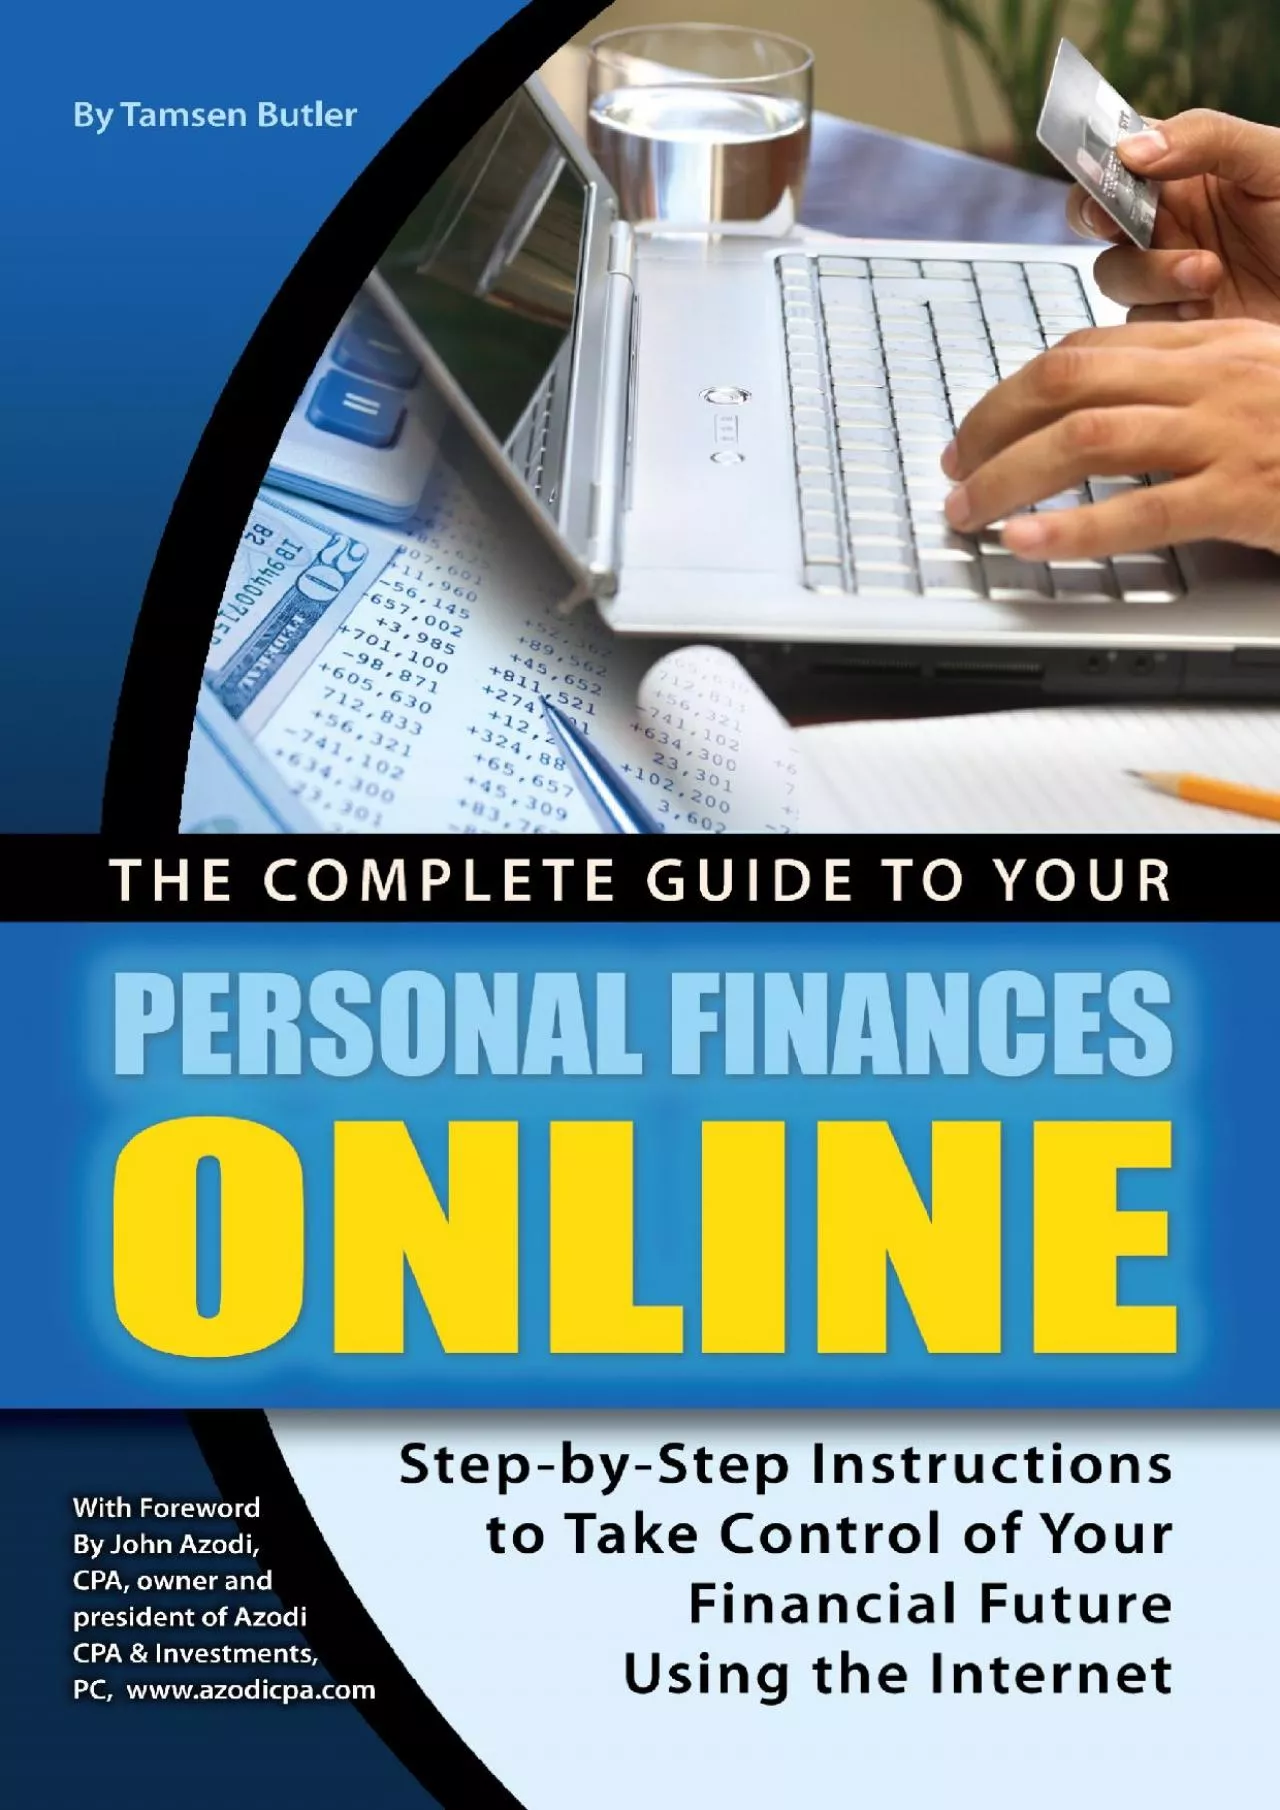 The Complete Guide to Your Personal Finances Online: Step-by-Step Instructions to Take